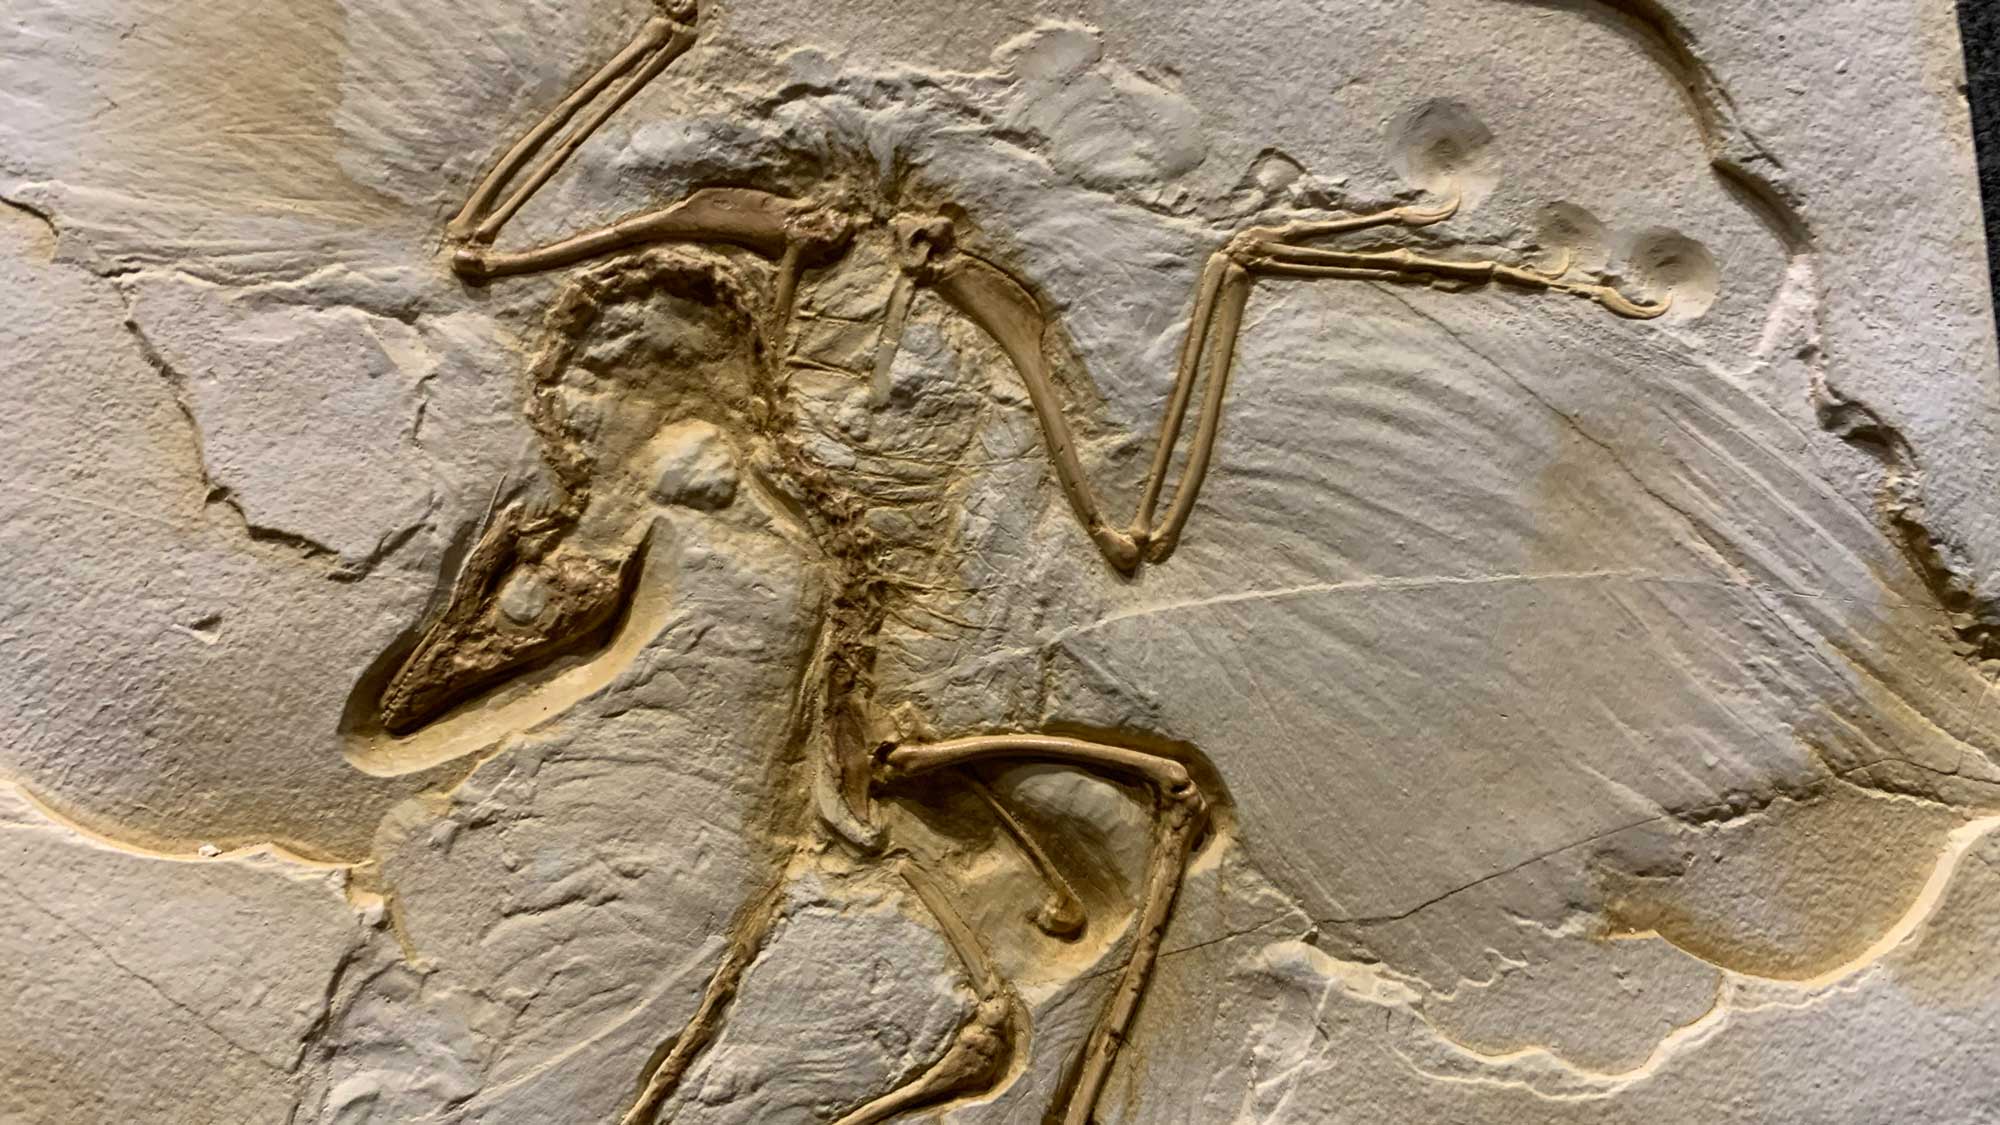 Photograph of a cast of an Archaeopteryx fossil.